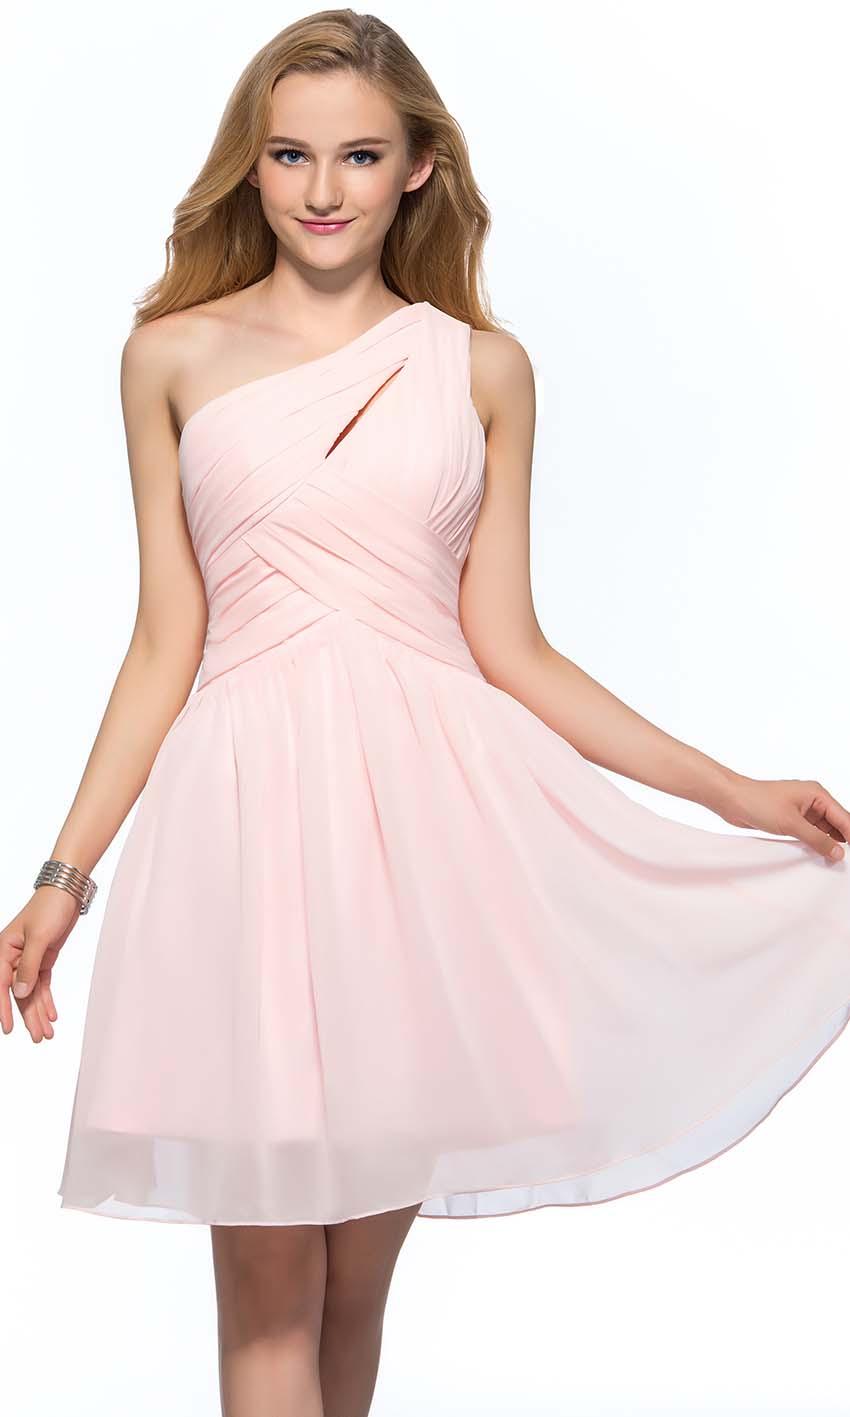 Свадьба - Pink Keyhole One Shoulder Short Bridesmaid Dress UK KSP388 [KSP388] - £79.00 : Cheap Prom Dresses Uk, Bridesmaid Dresses, 2014 Prom & Evening Dresses, Look for cheap elegant prom dresses 2014, cocktail gowns, or dresses for special occasions? kissprom.co.